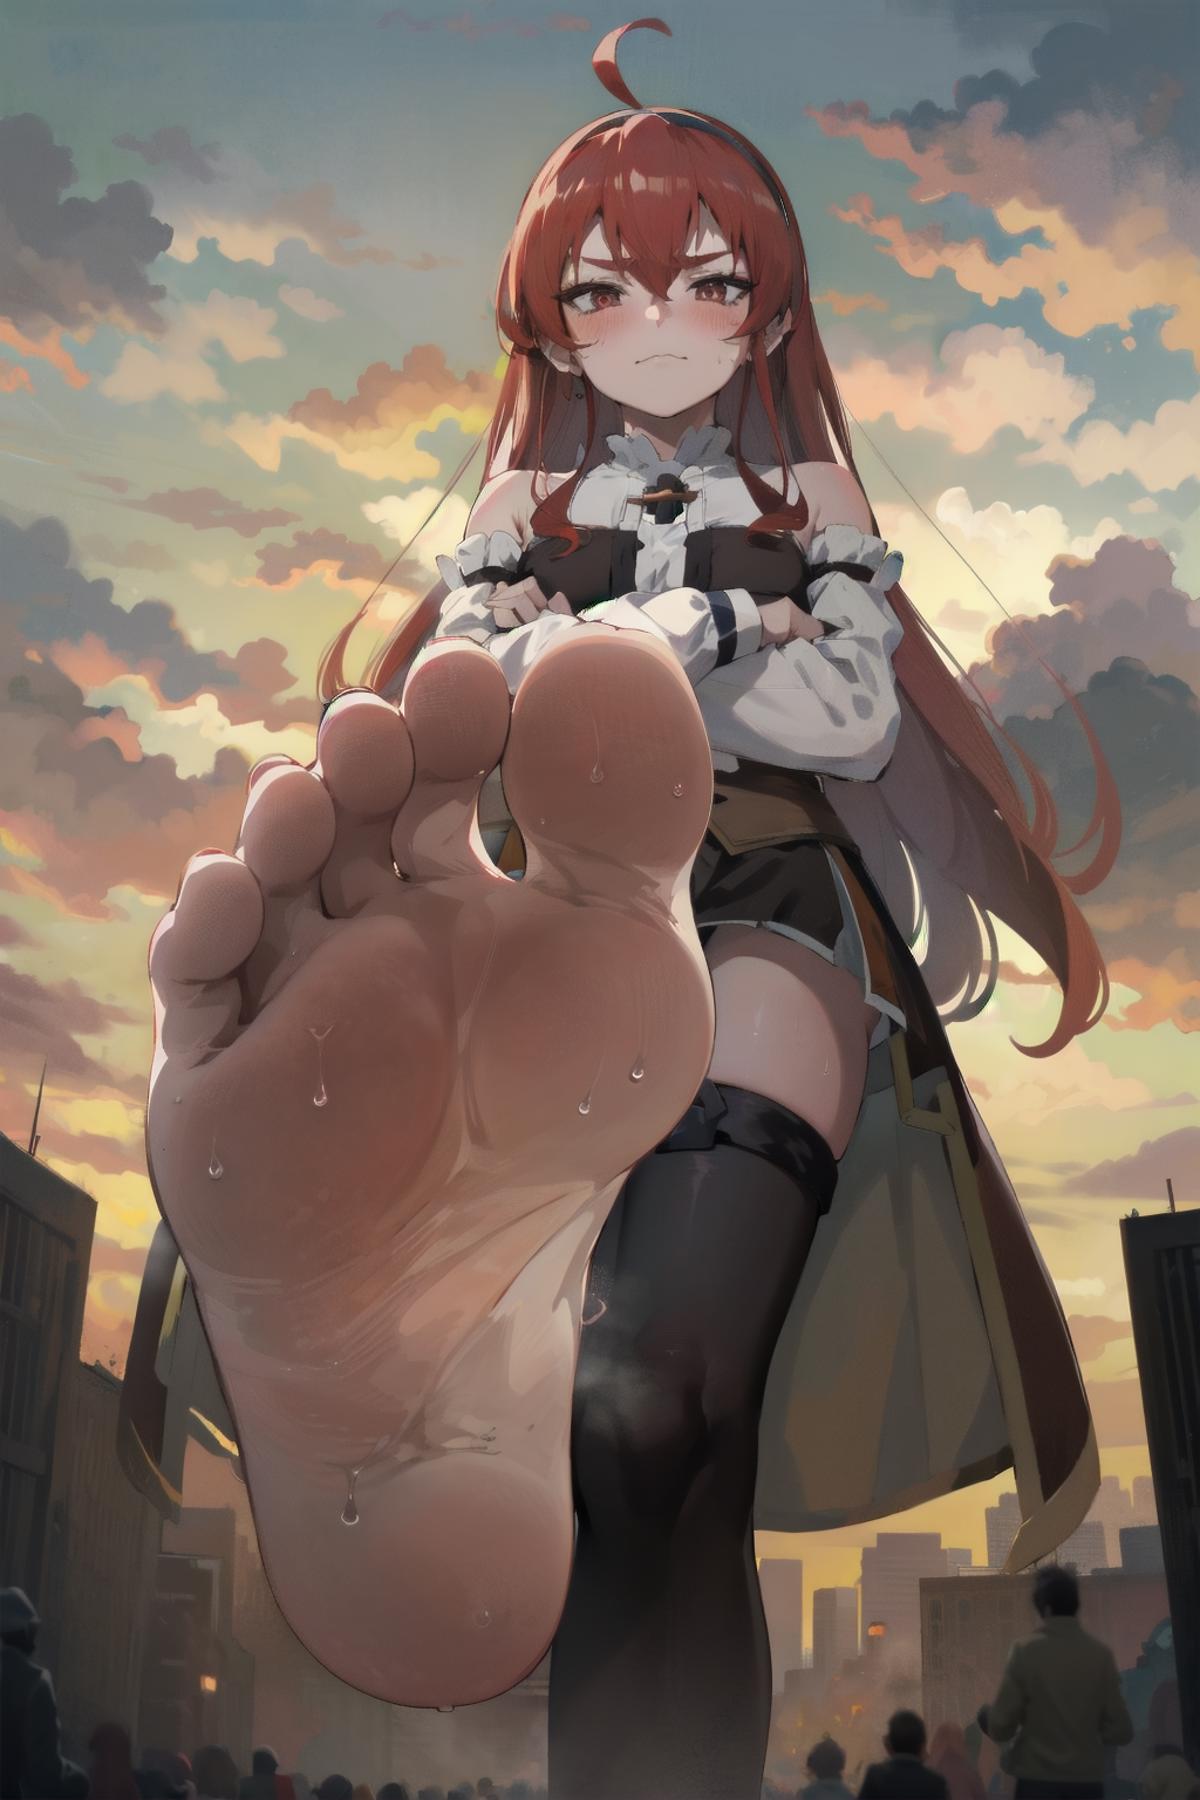 Giantess | Concept image by EnergeticRooster